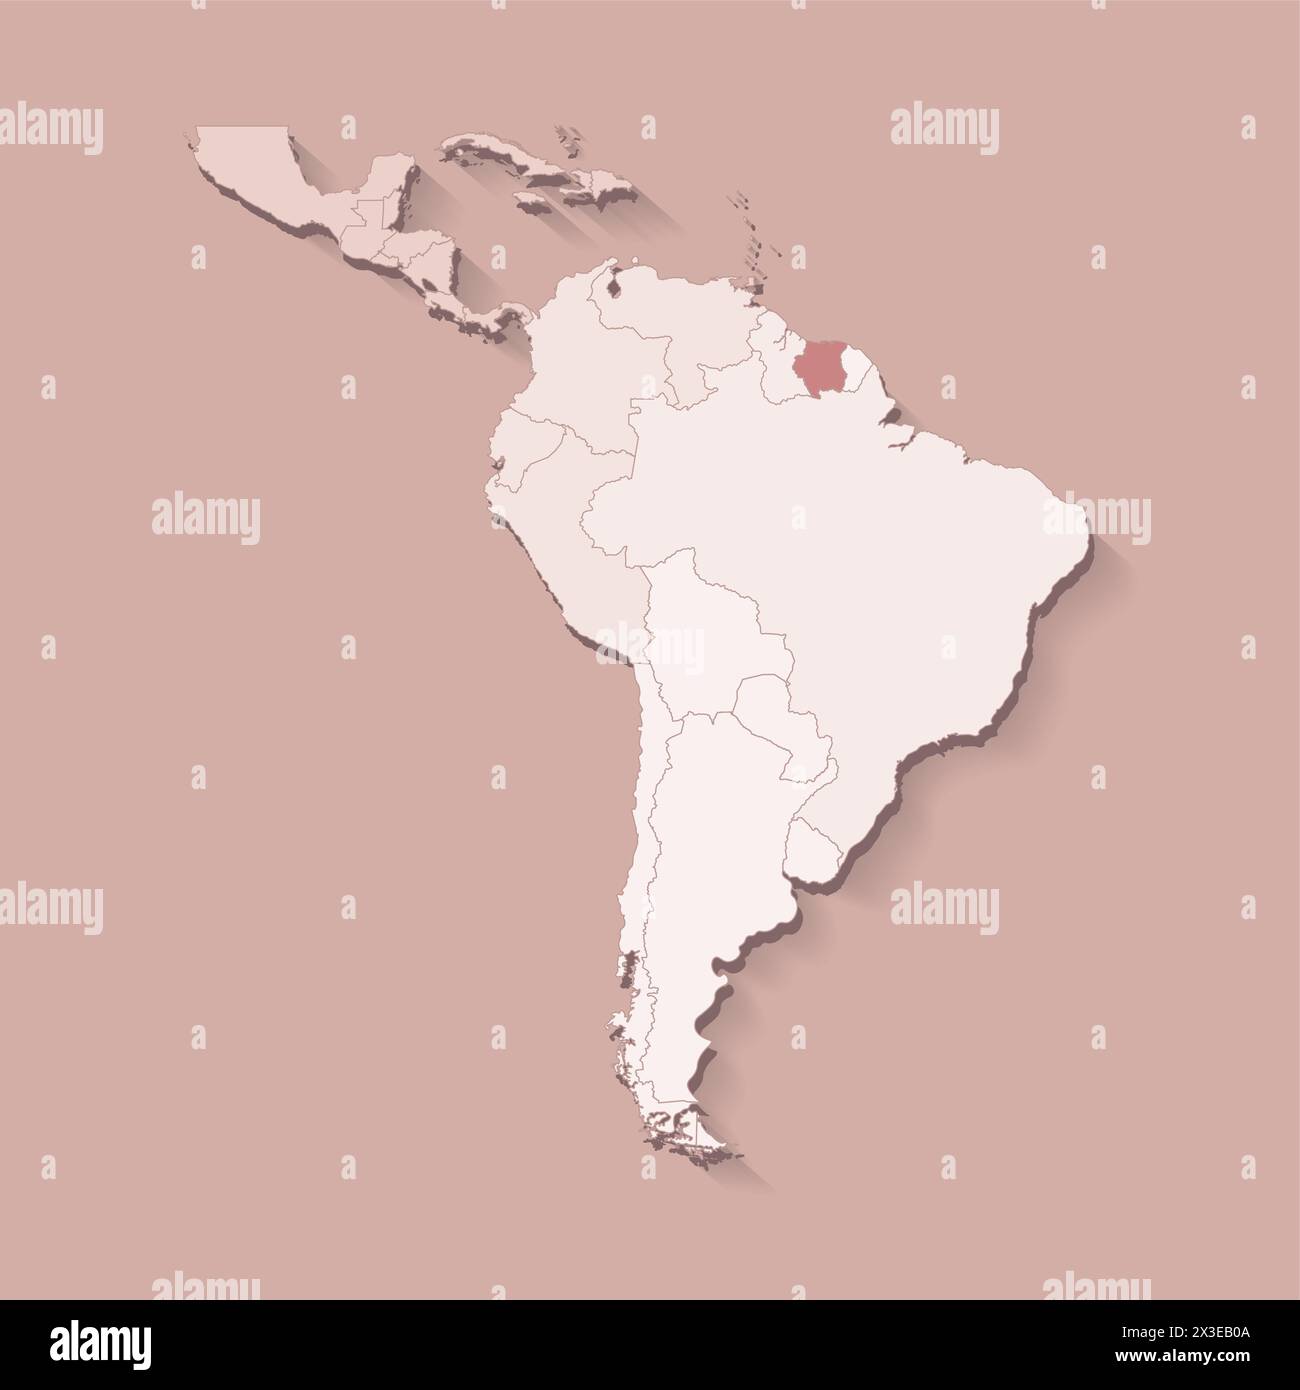 Vector illustration with South America land with borders of states and marked country Suriname. Political map in brown colors with regions. Beige back Stock Vector